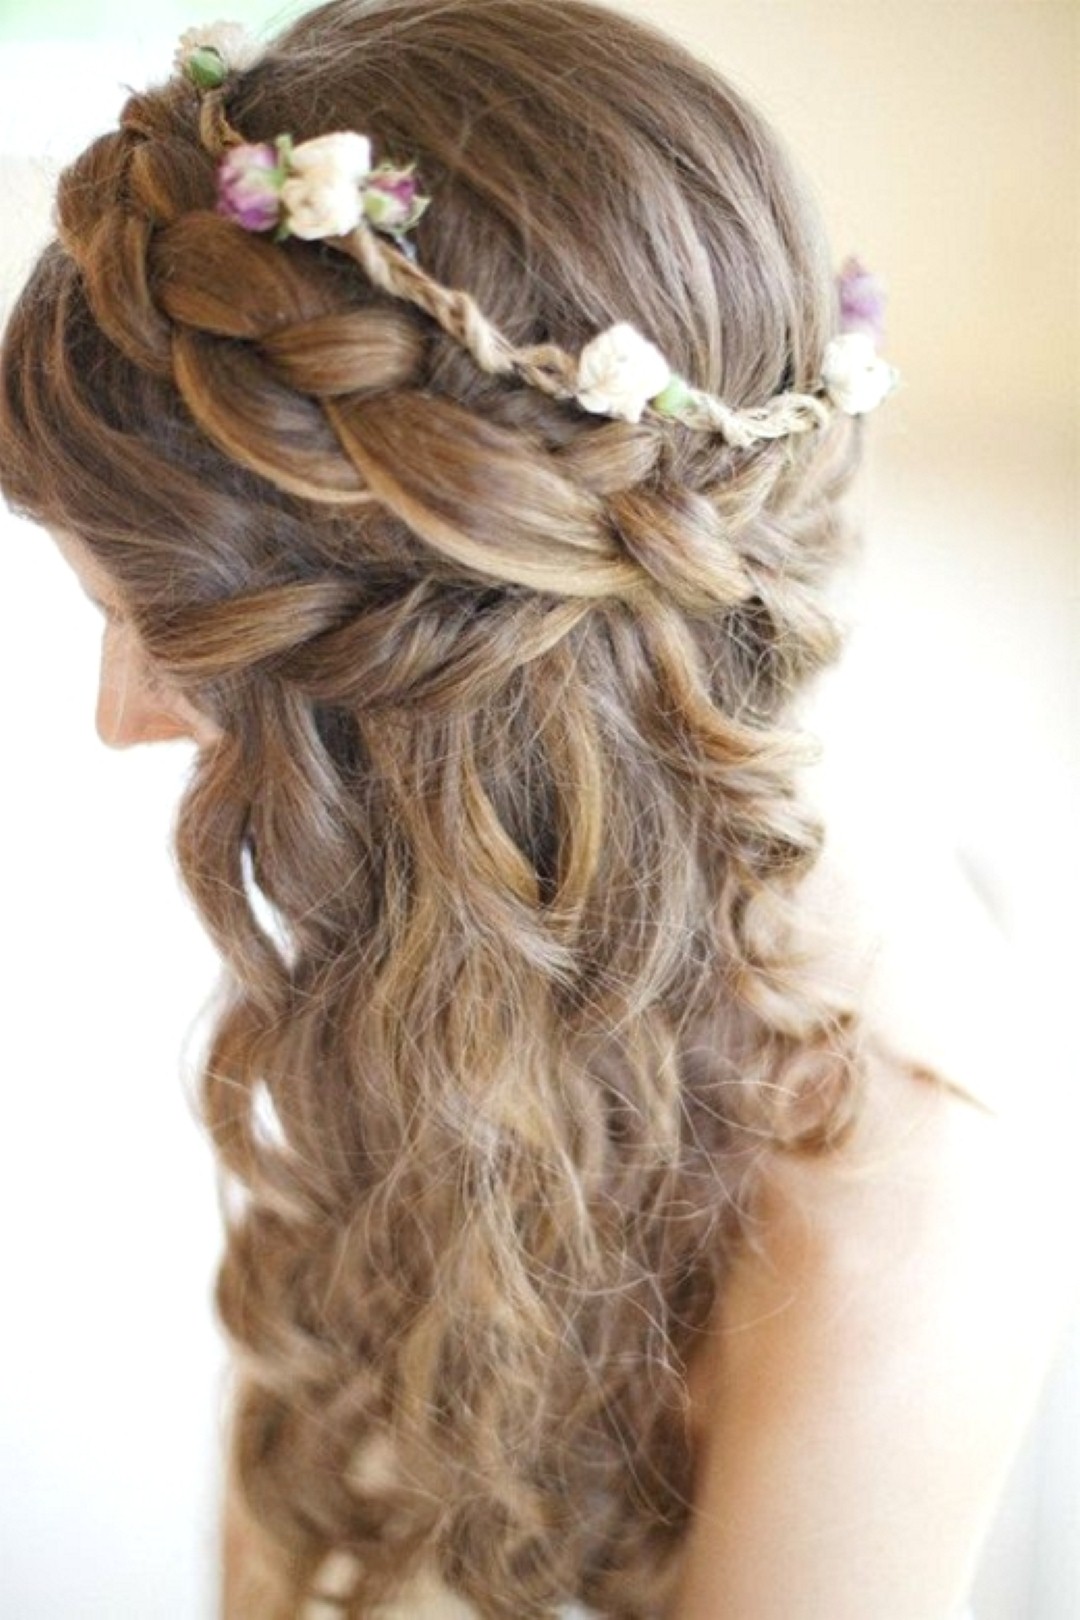 Prettiest Homecoming Hairstyles Ideas Wallpaper Wp240537 - Hairstyles With Curled Hair Half Up Half Down - HD Wallpaper 